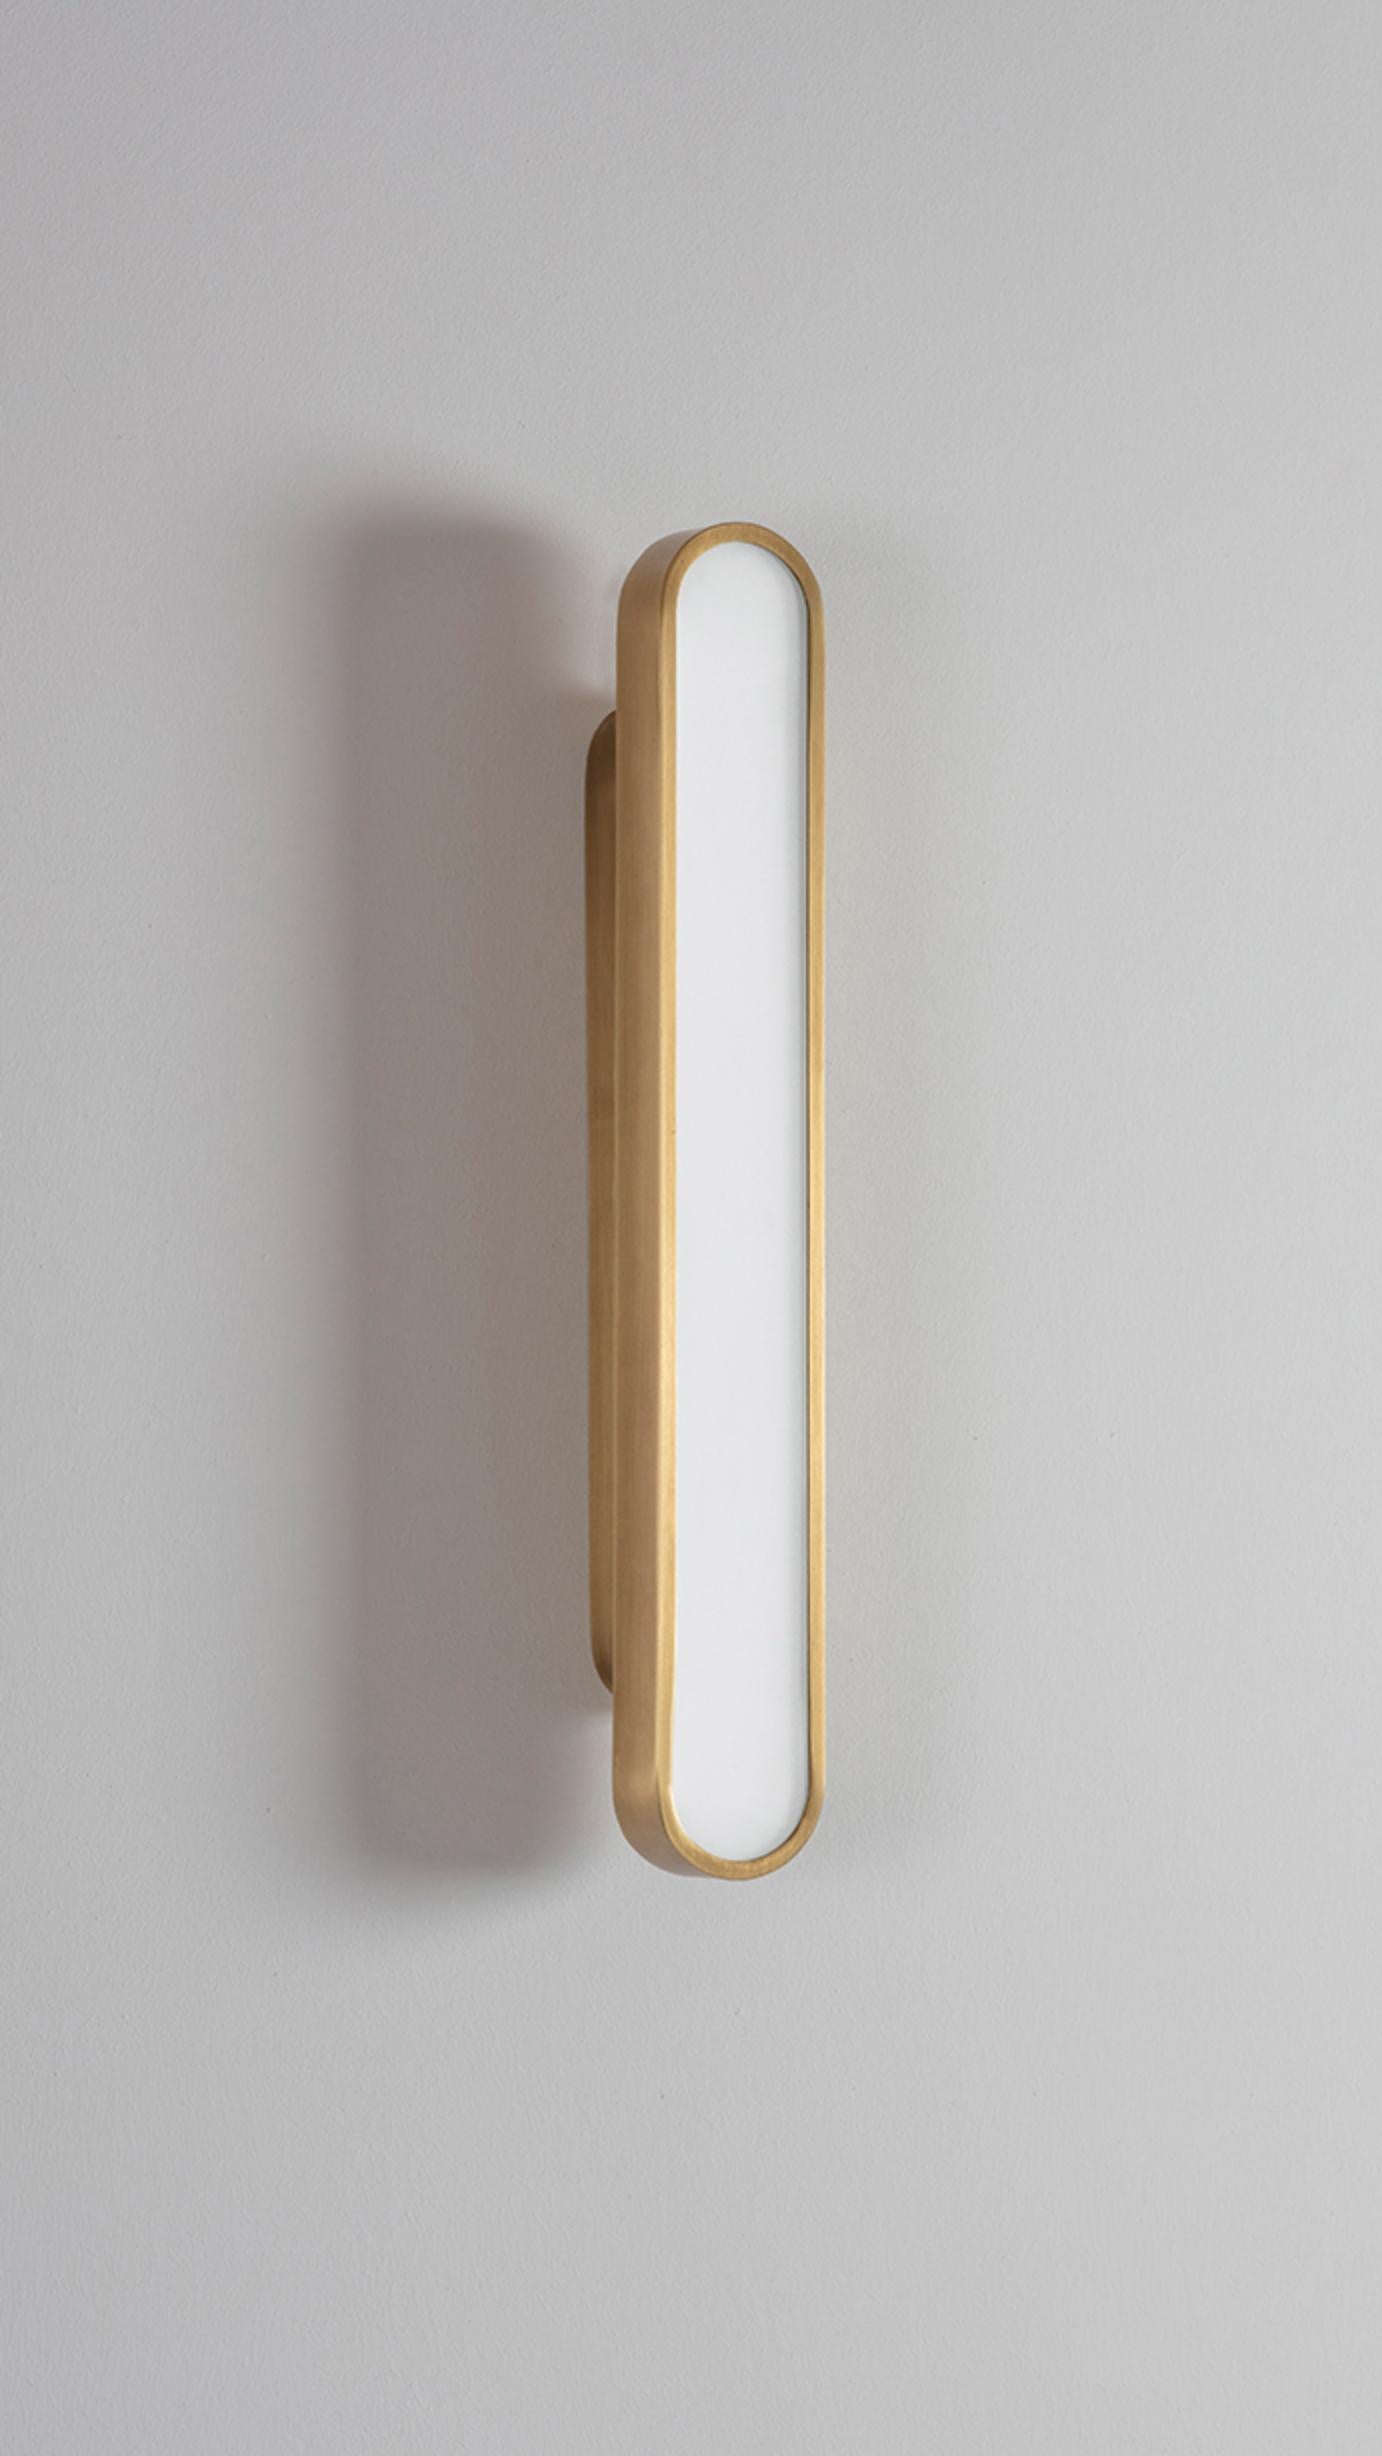 Set of 2 capsule golden wall lights by Square in Circle
Dimensions: D5 x W5.5 x H40 cm
Materials:Brushed brass/ opaque glass
Other finishes available.

Perfect rounded rectangular shape wall light. Metal wall light is neatly fixed with the same